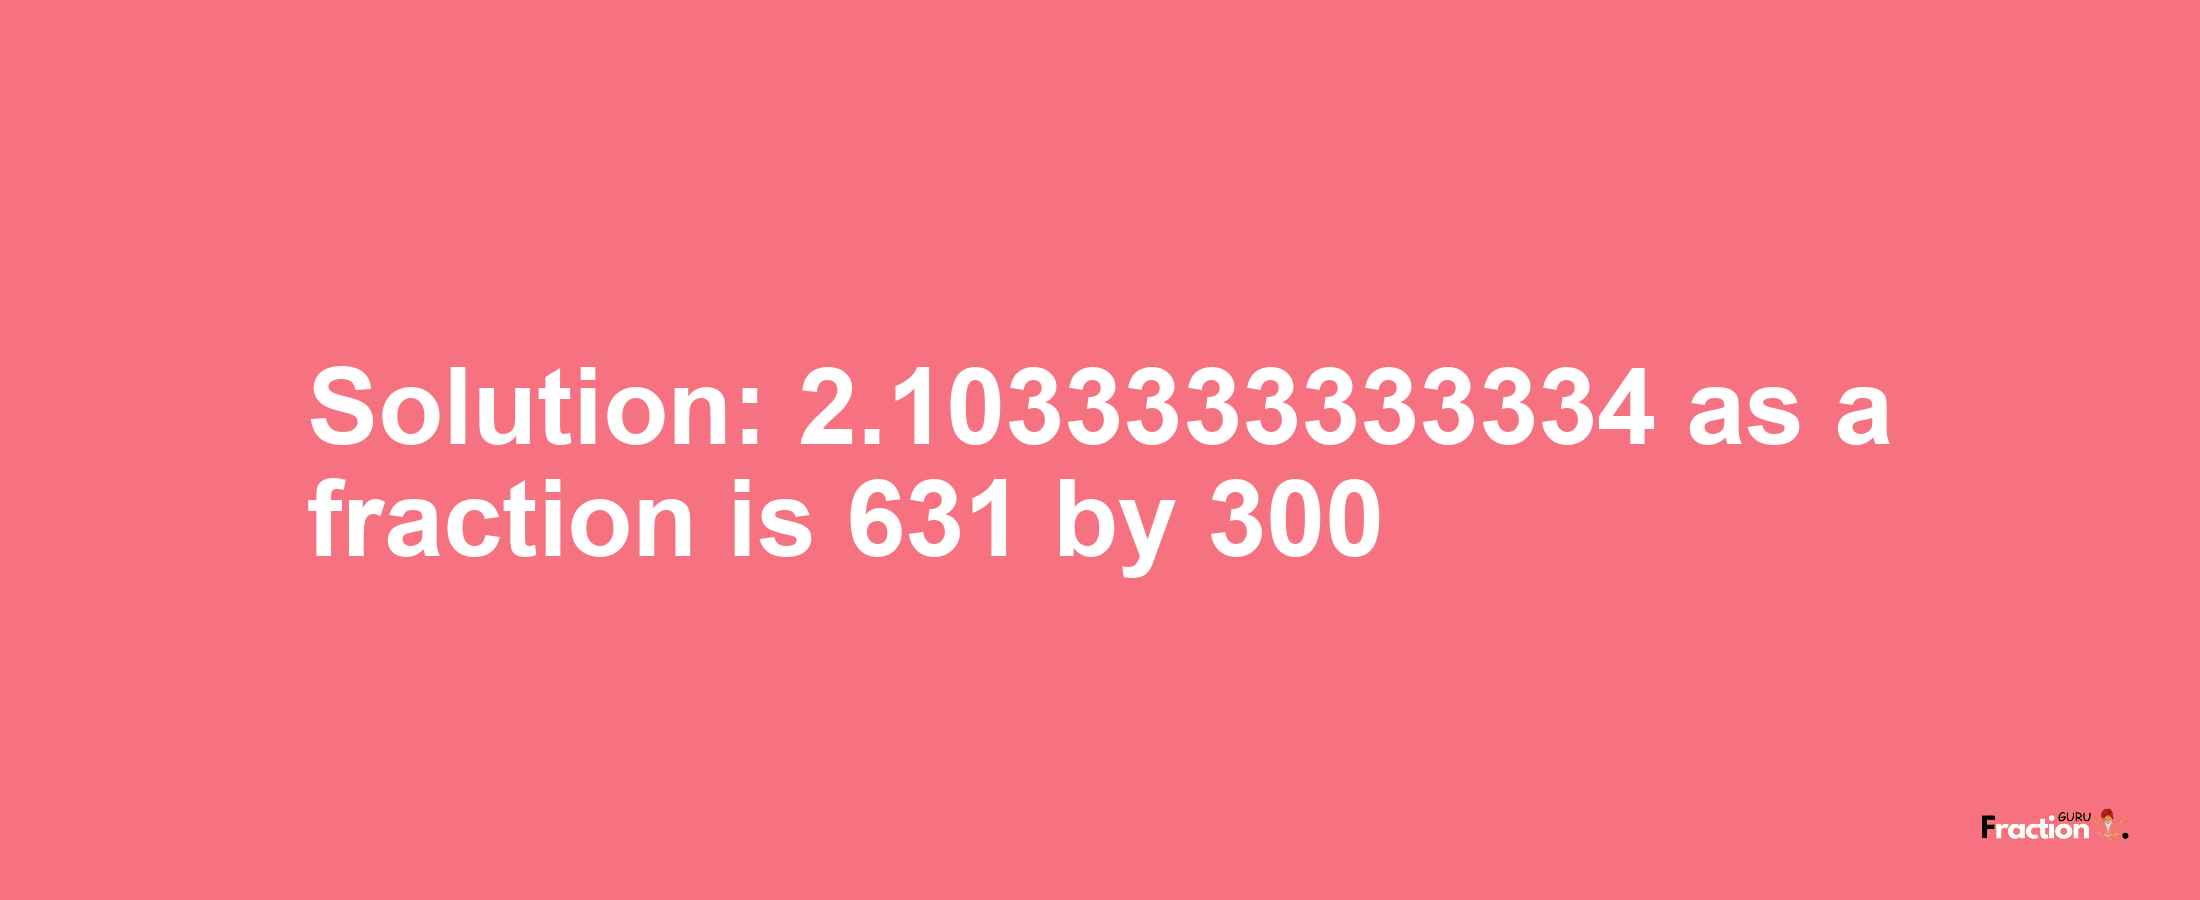 Solution:2.1033333333334 as a fraction is 631/300